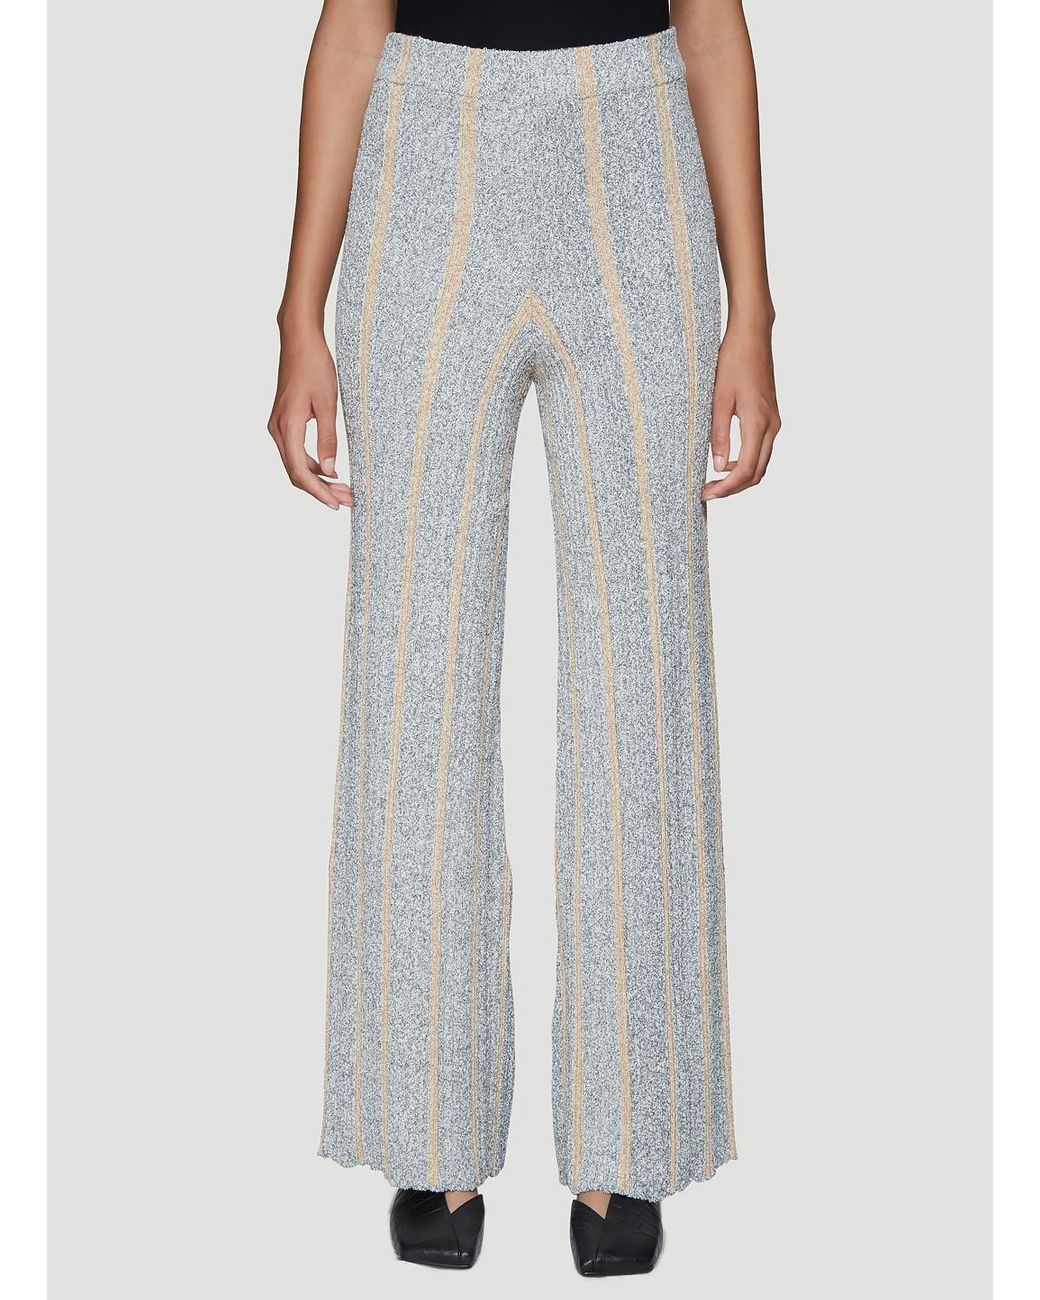 Jil Sander Wool Ribbed Knitted Pants In Grey in Gray - Lyst